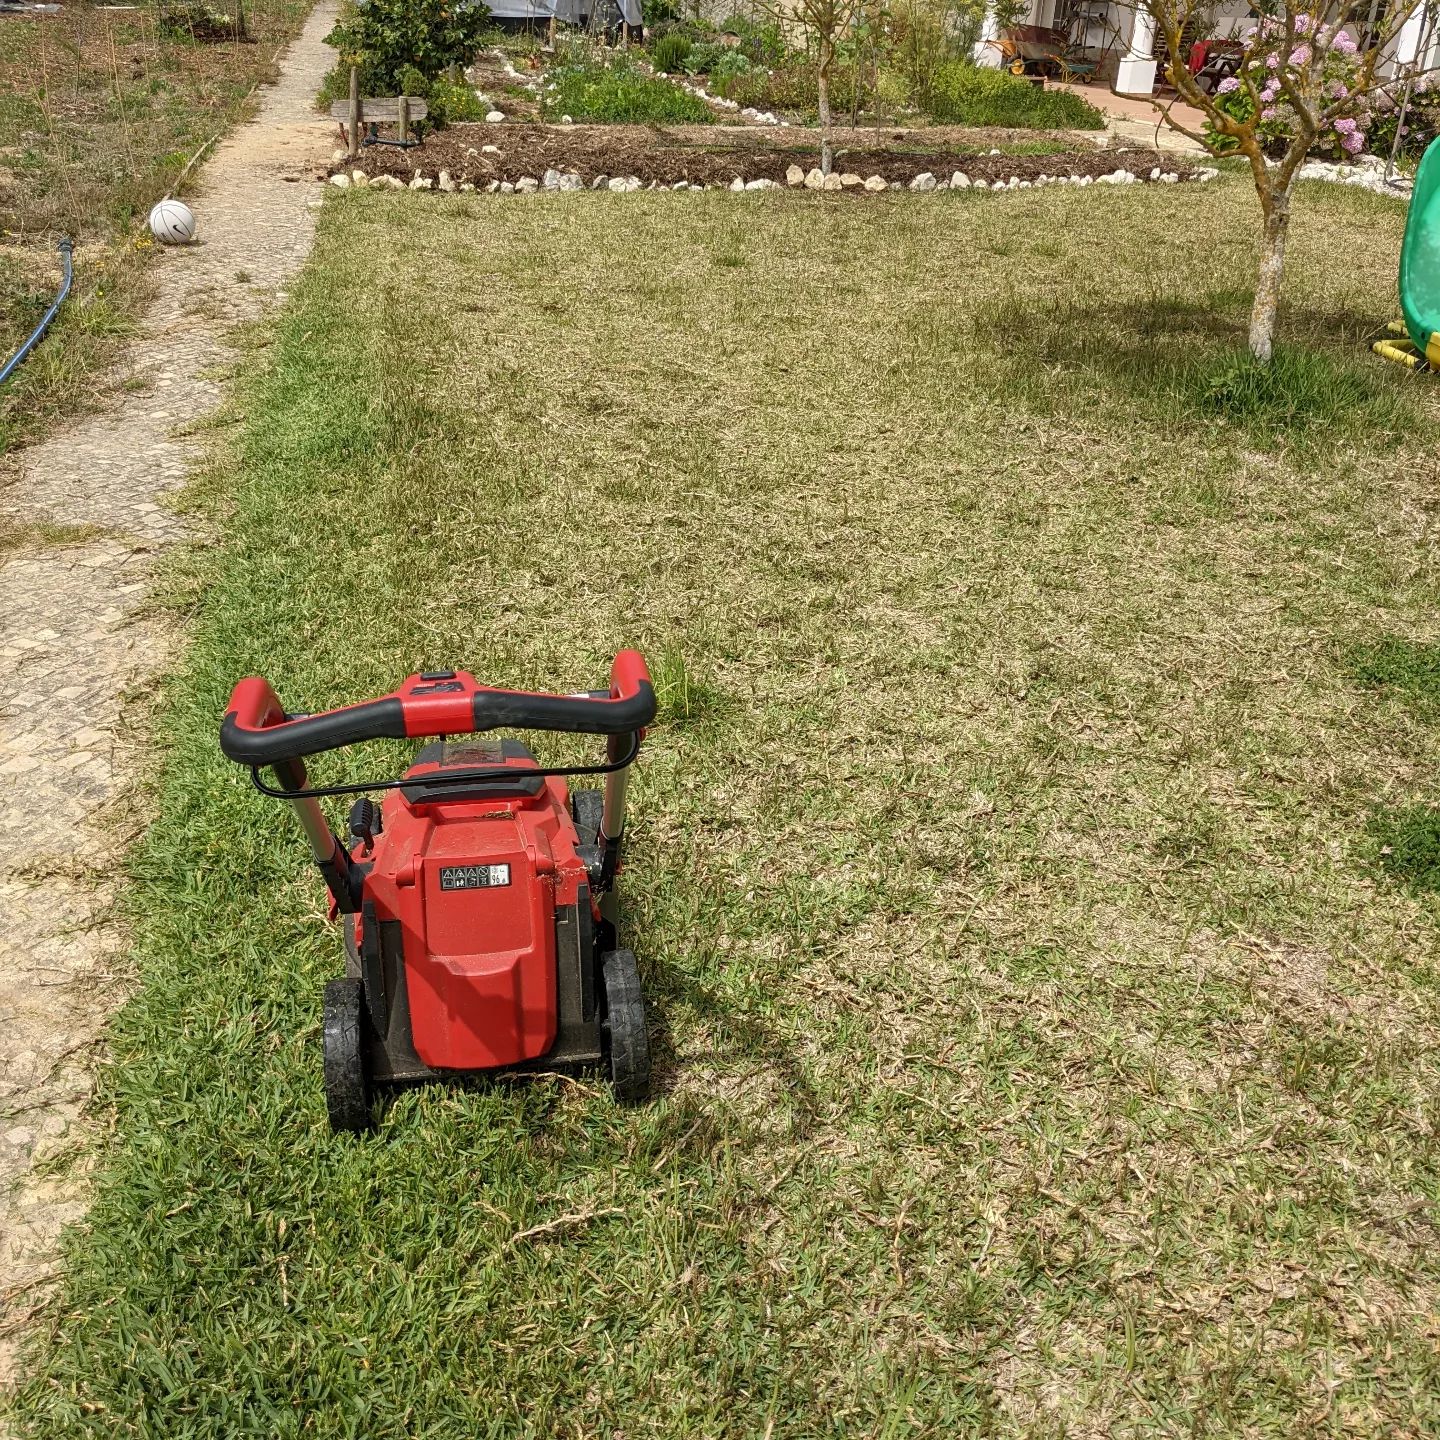 Mowing the (rather neglected) lawn